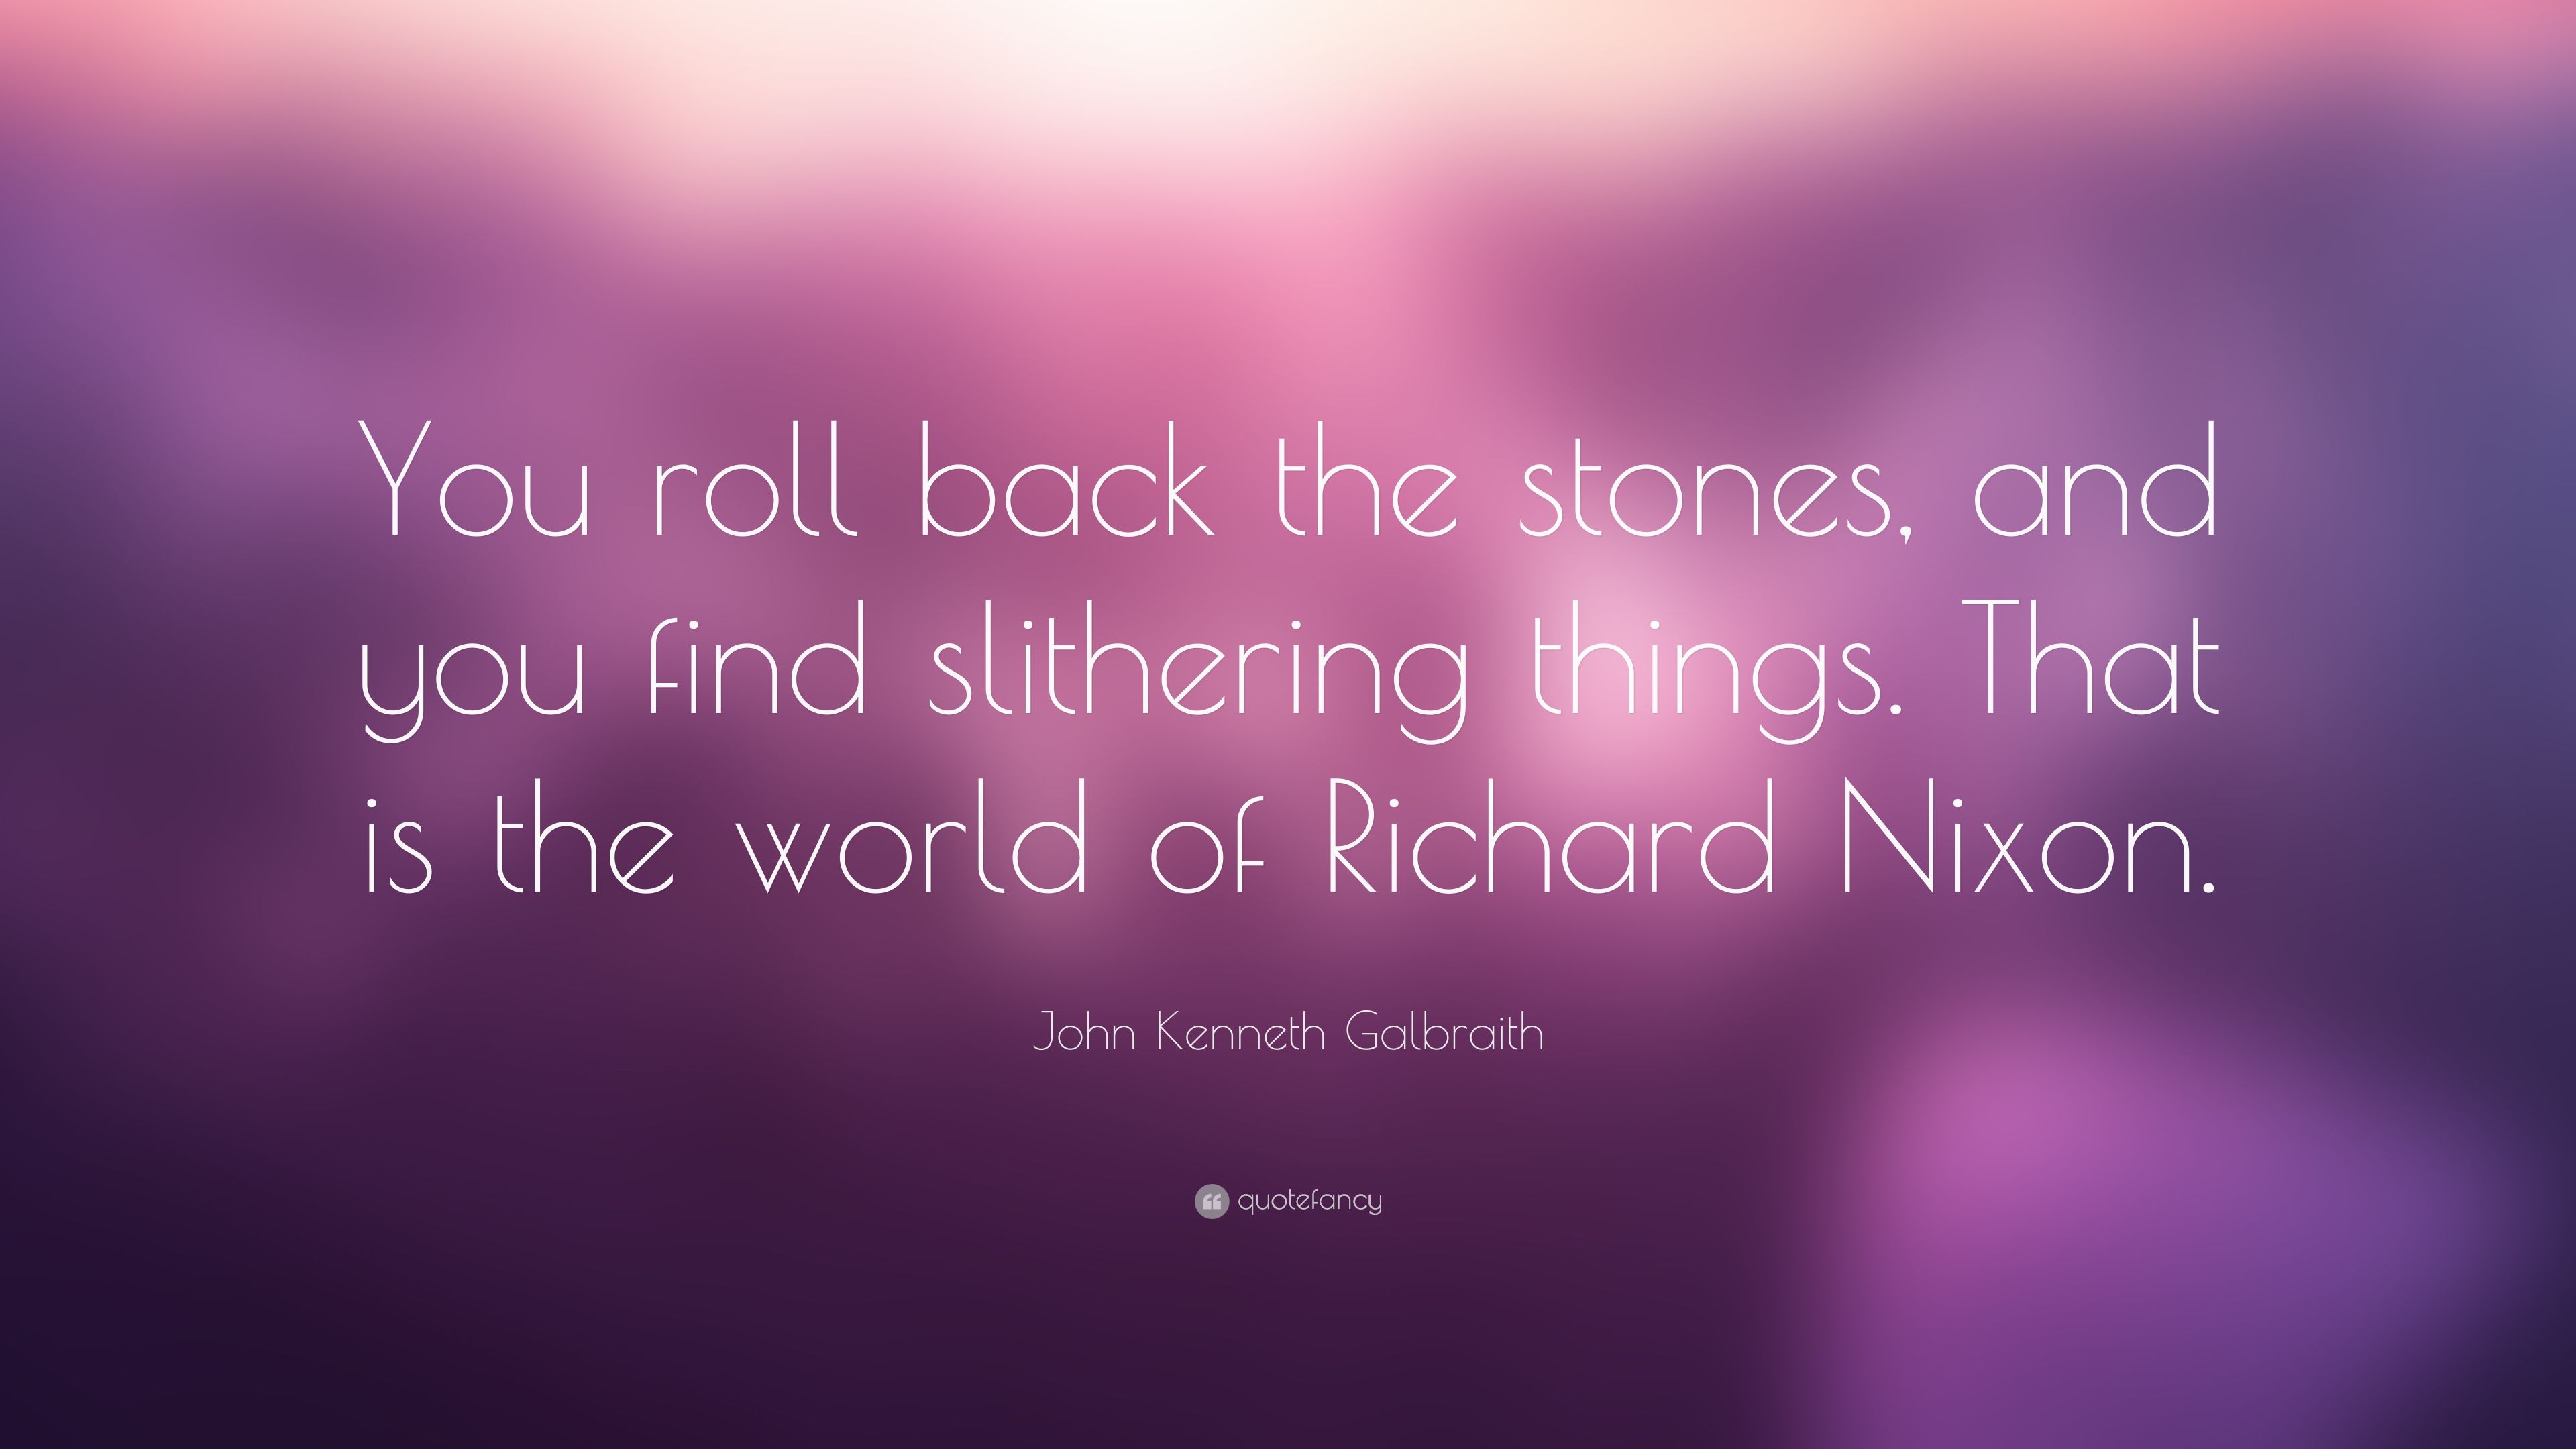 John Kenneth Galbraith Quote: “You roll back the stones, and you find slithering things. That is the world of Richard Nixon.” (7 wallpaper)